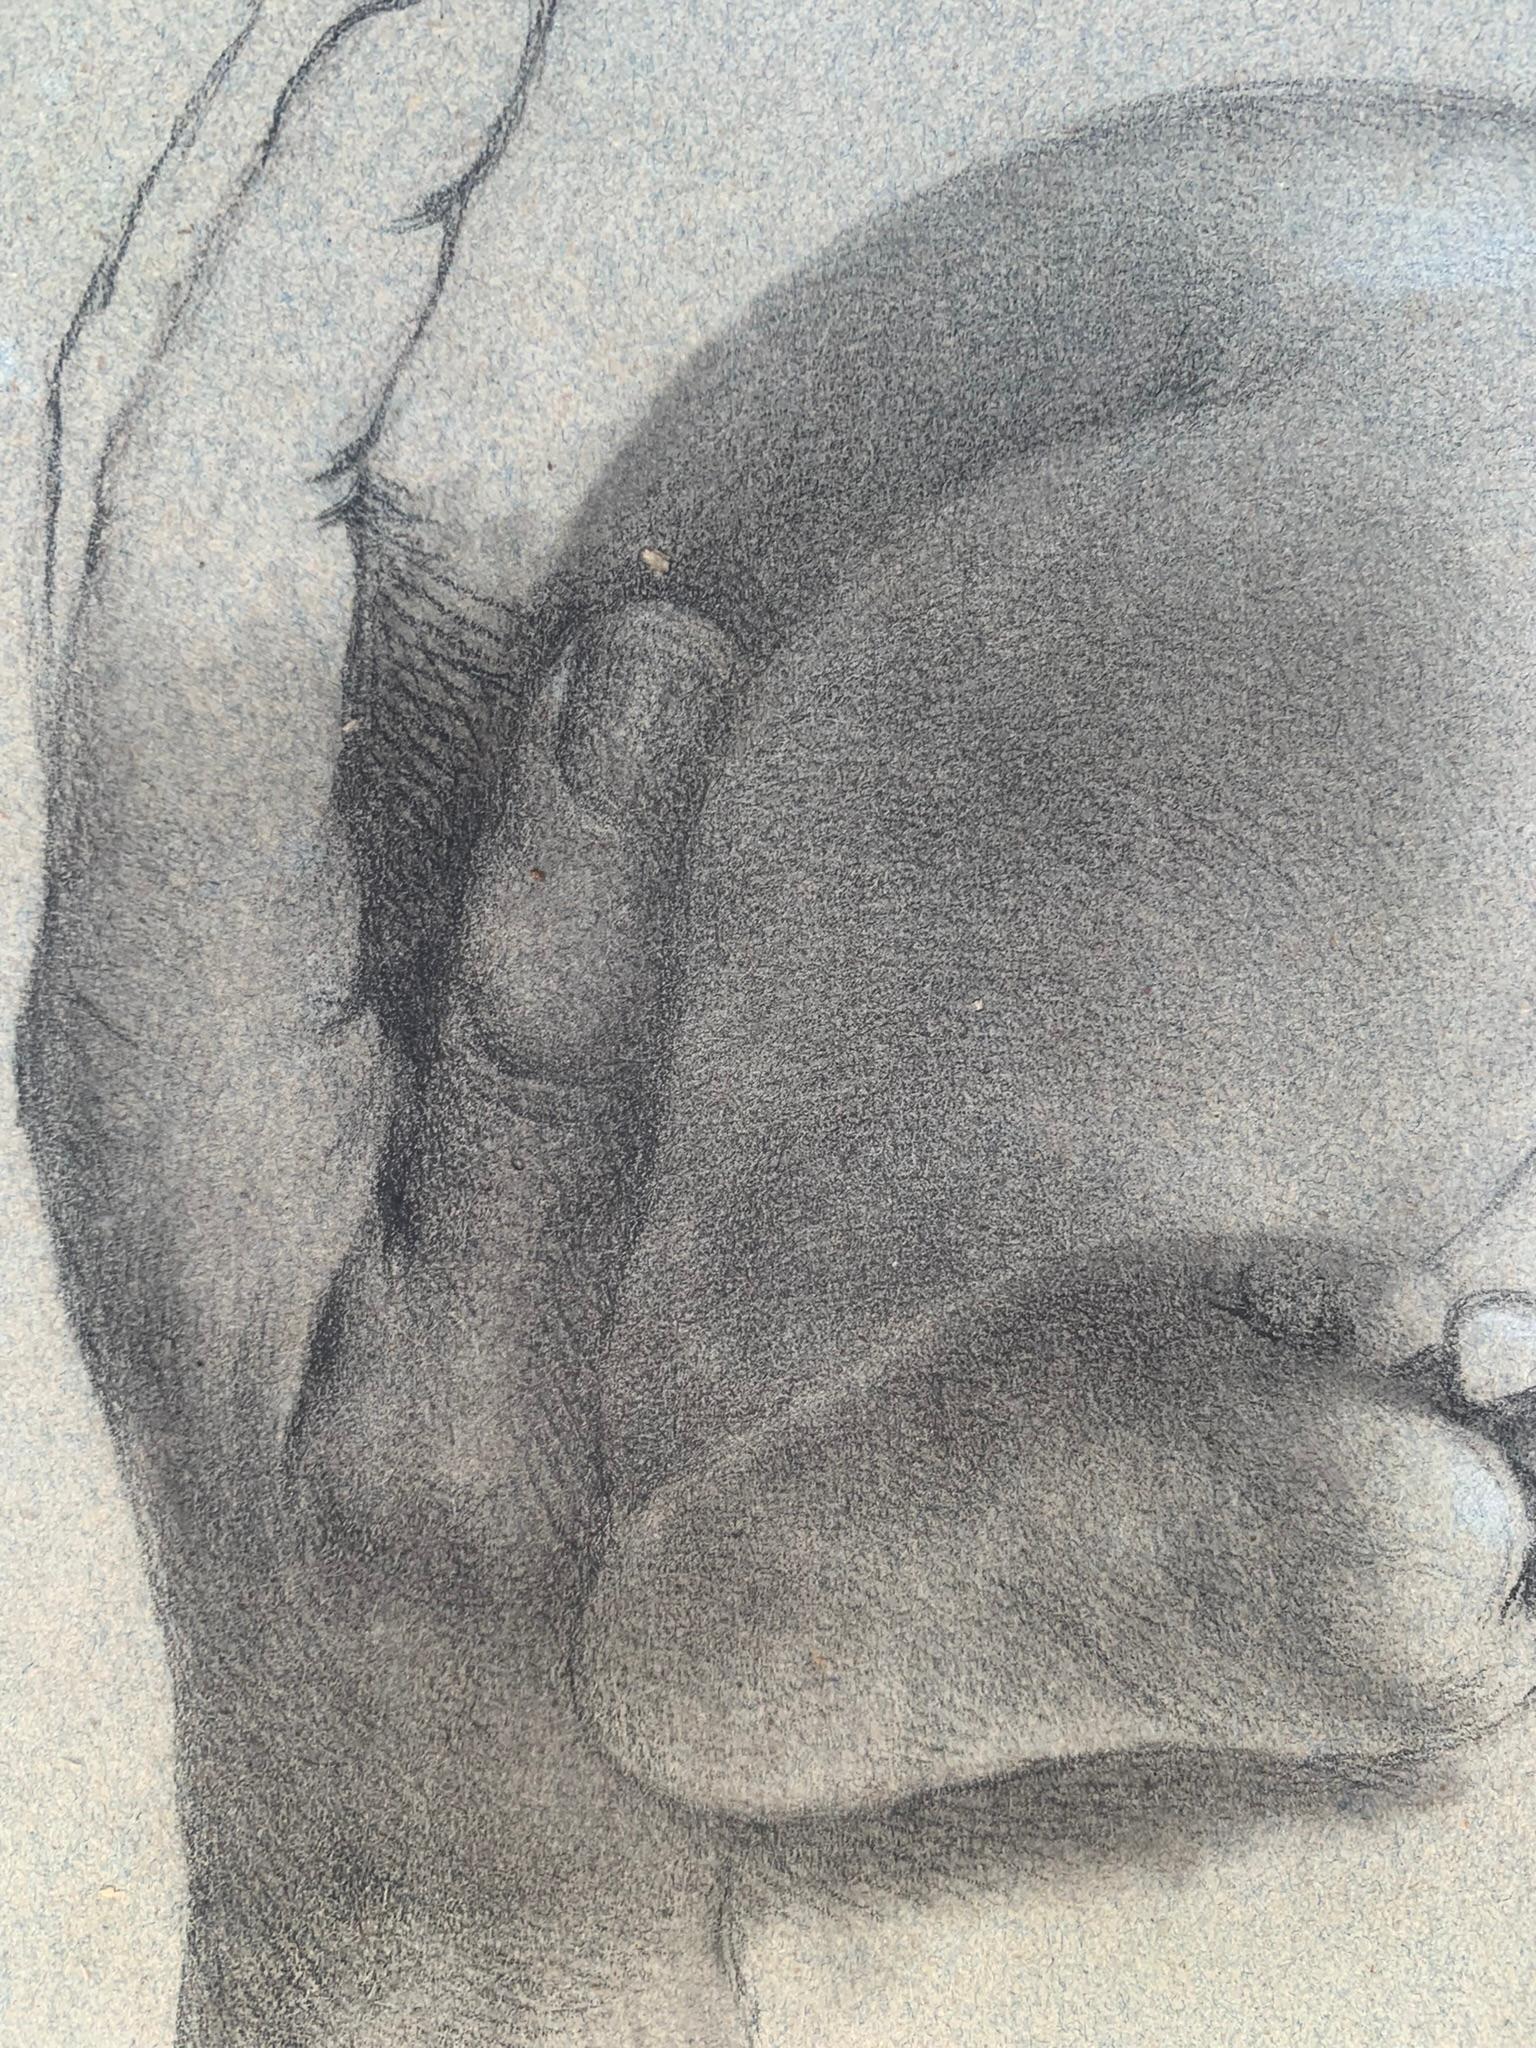 Academic study of hands and child's feet. 19th century.  5